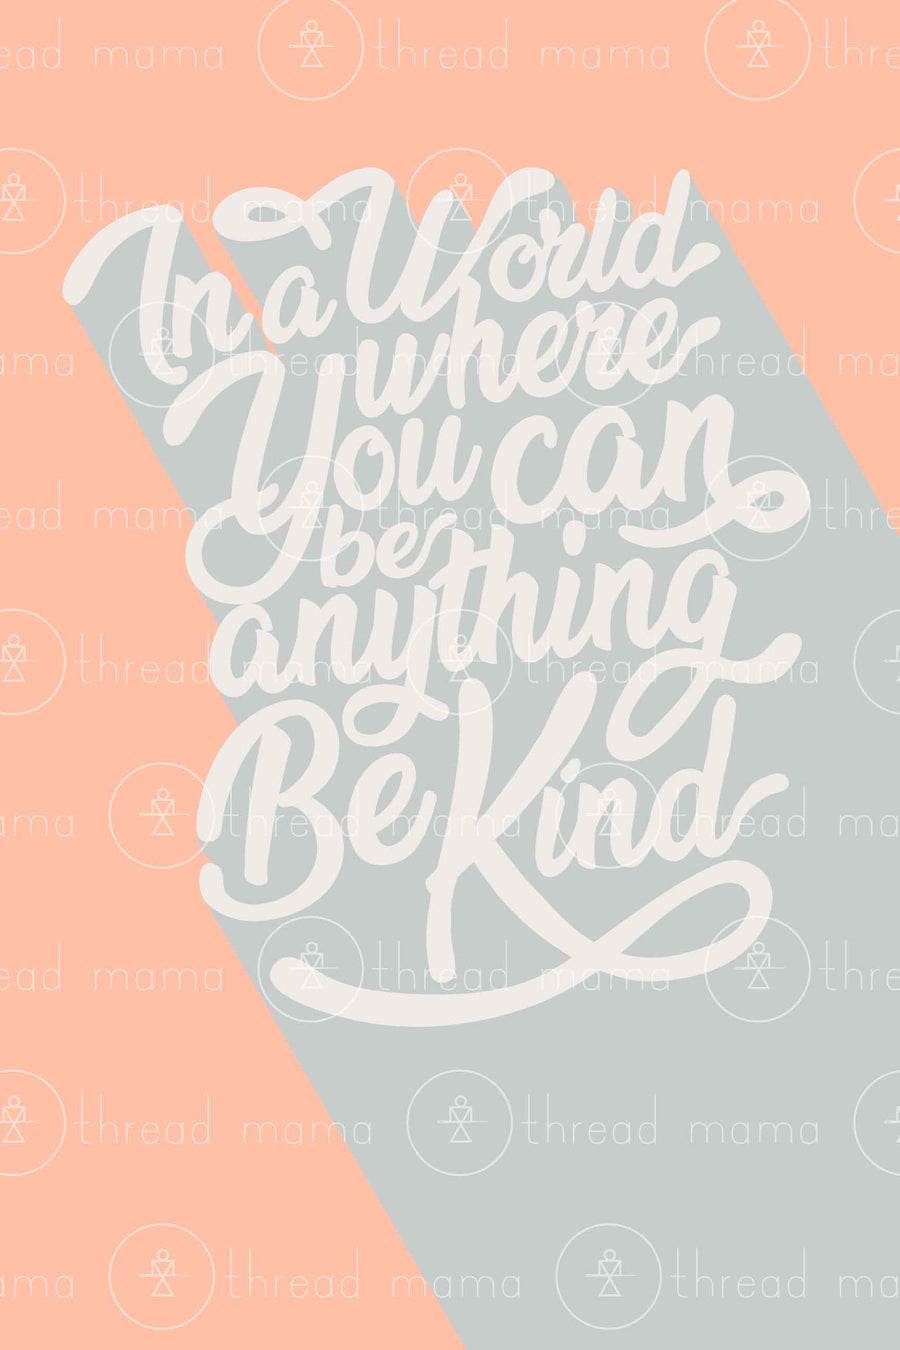 Be Kind - 3 colors included (Printable Poster)